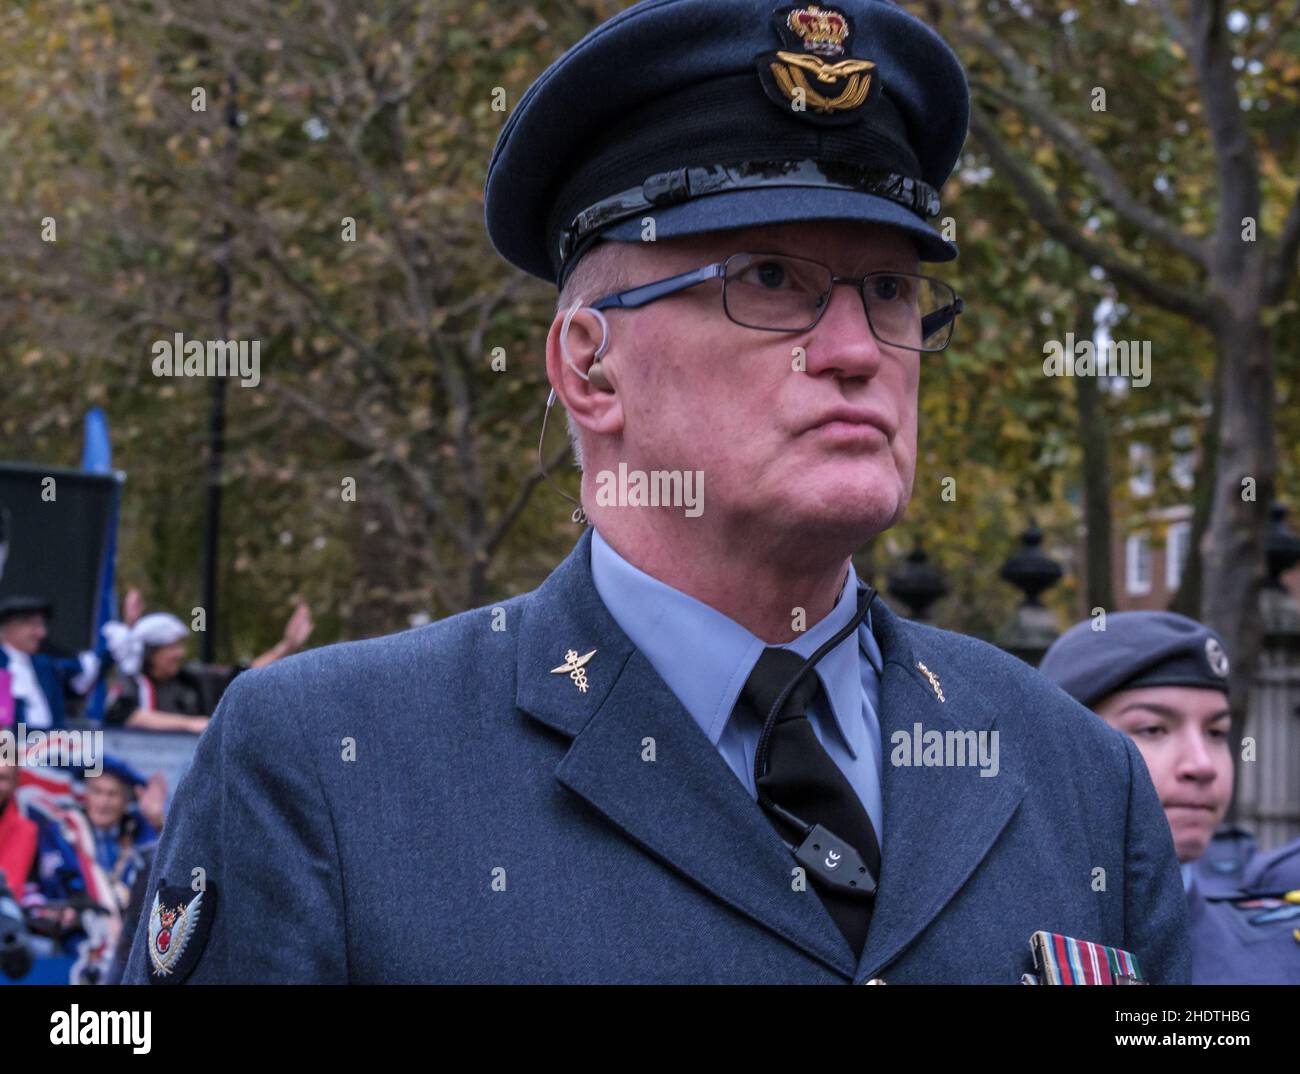 Close up of a Royal Air Force medical officer marching with the London & South East Region Air Cadets in the Lord Mayor’s Show 2021, London, England. Stock Photo